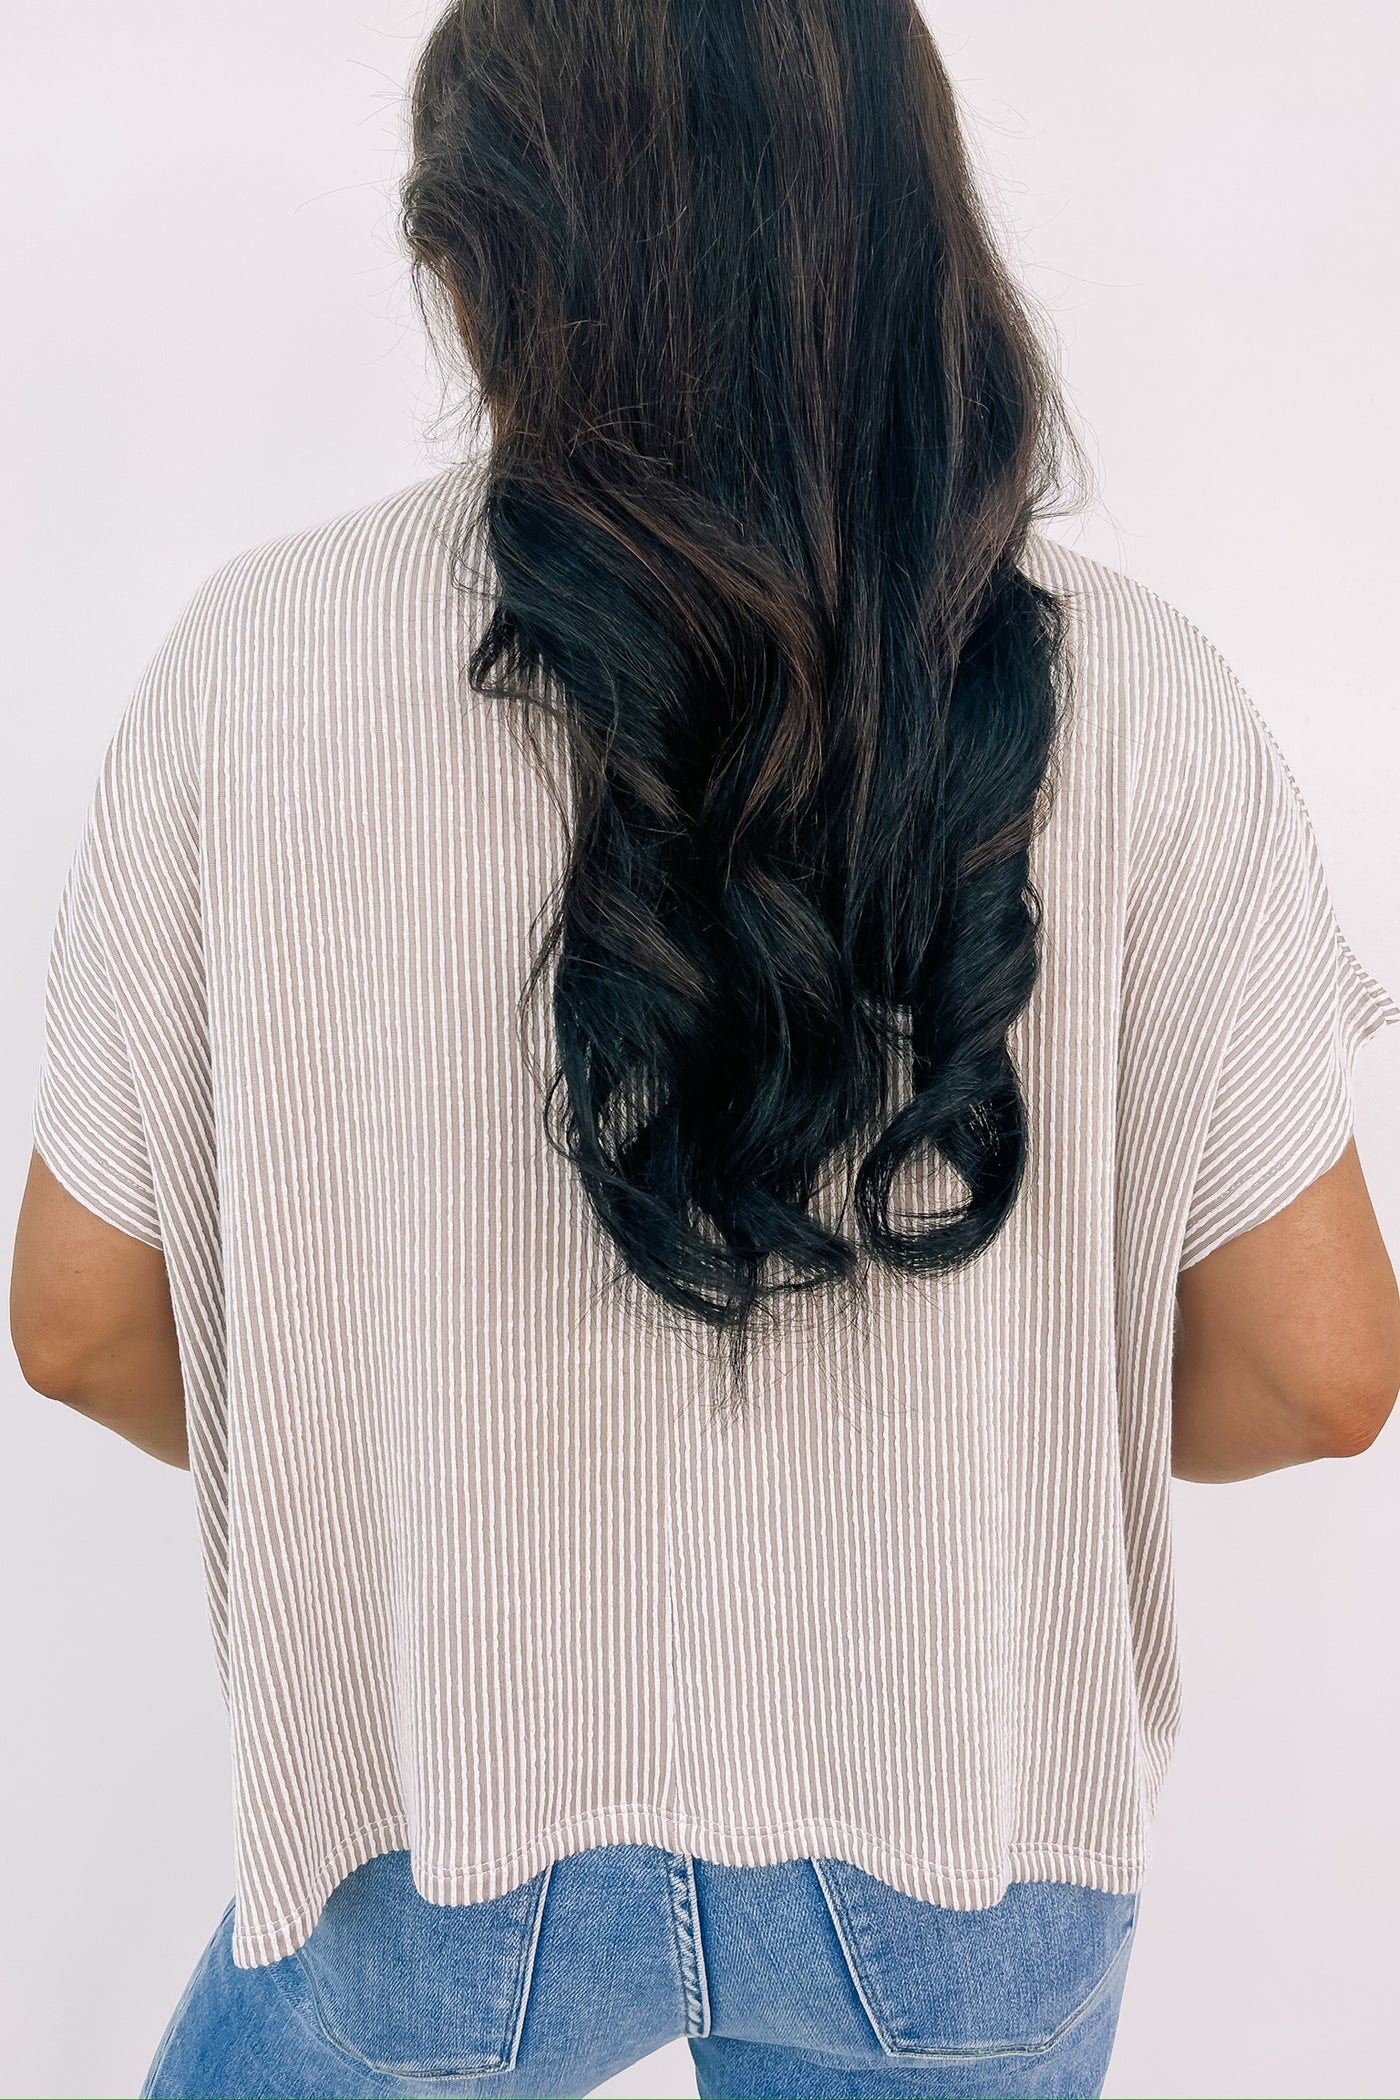 RESTOCK: On To Simpler Times Ribbed Top